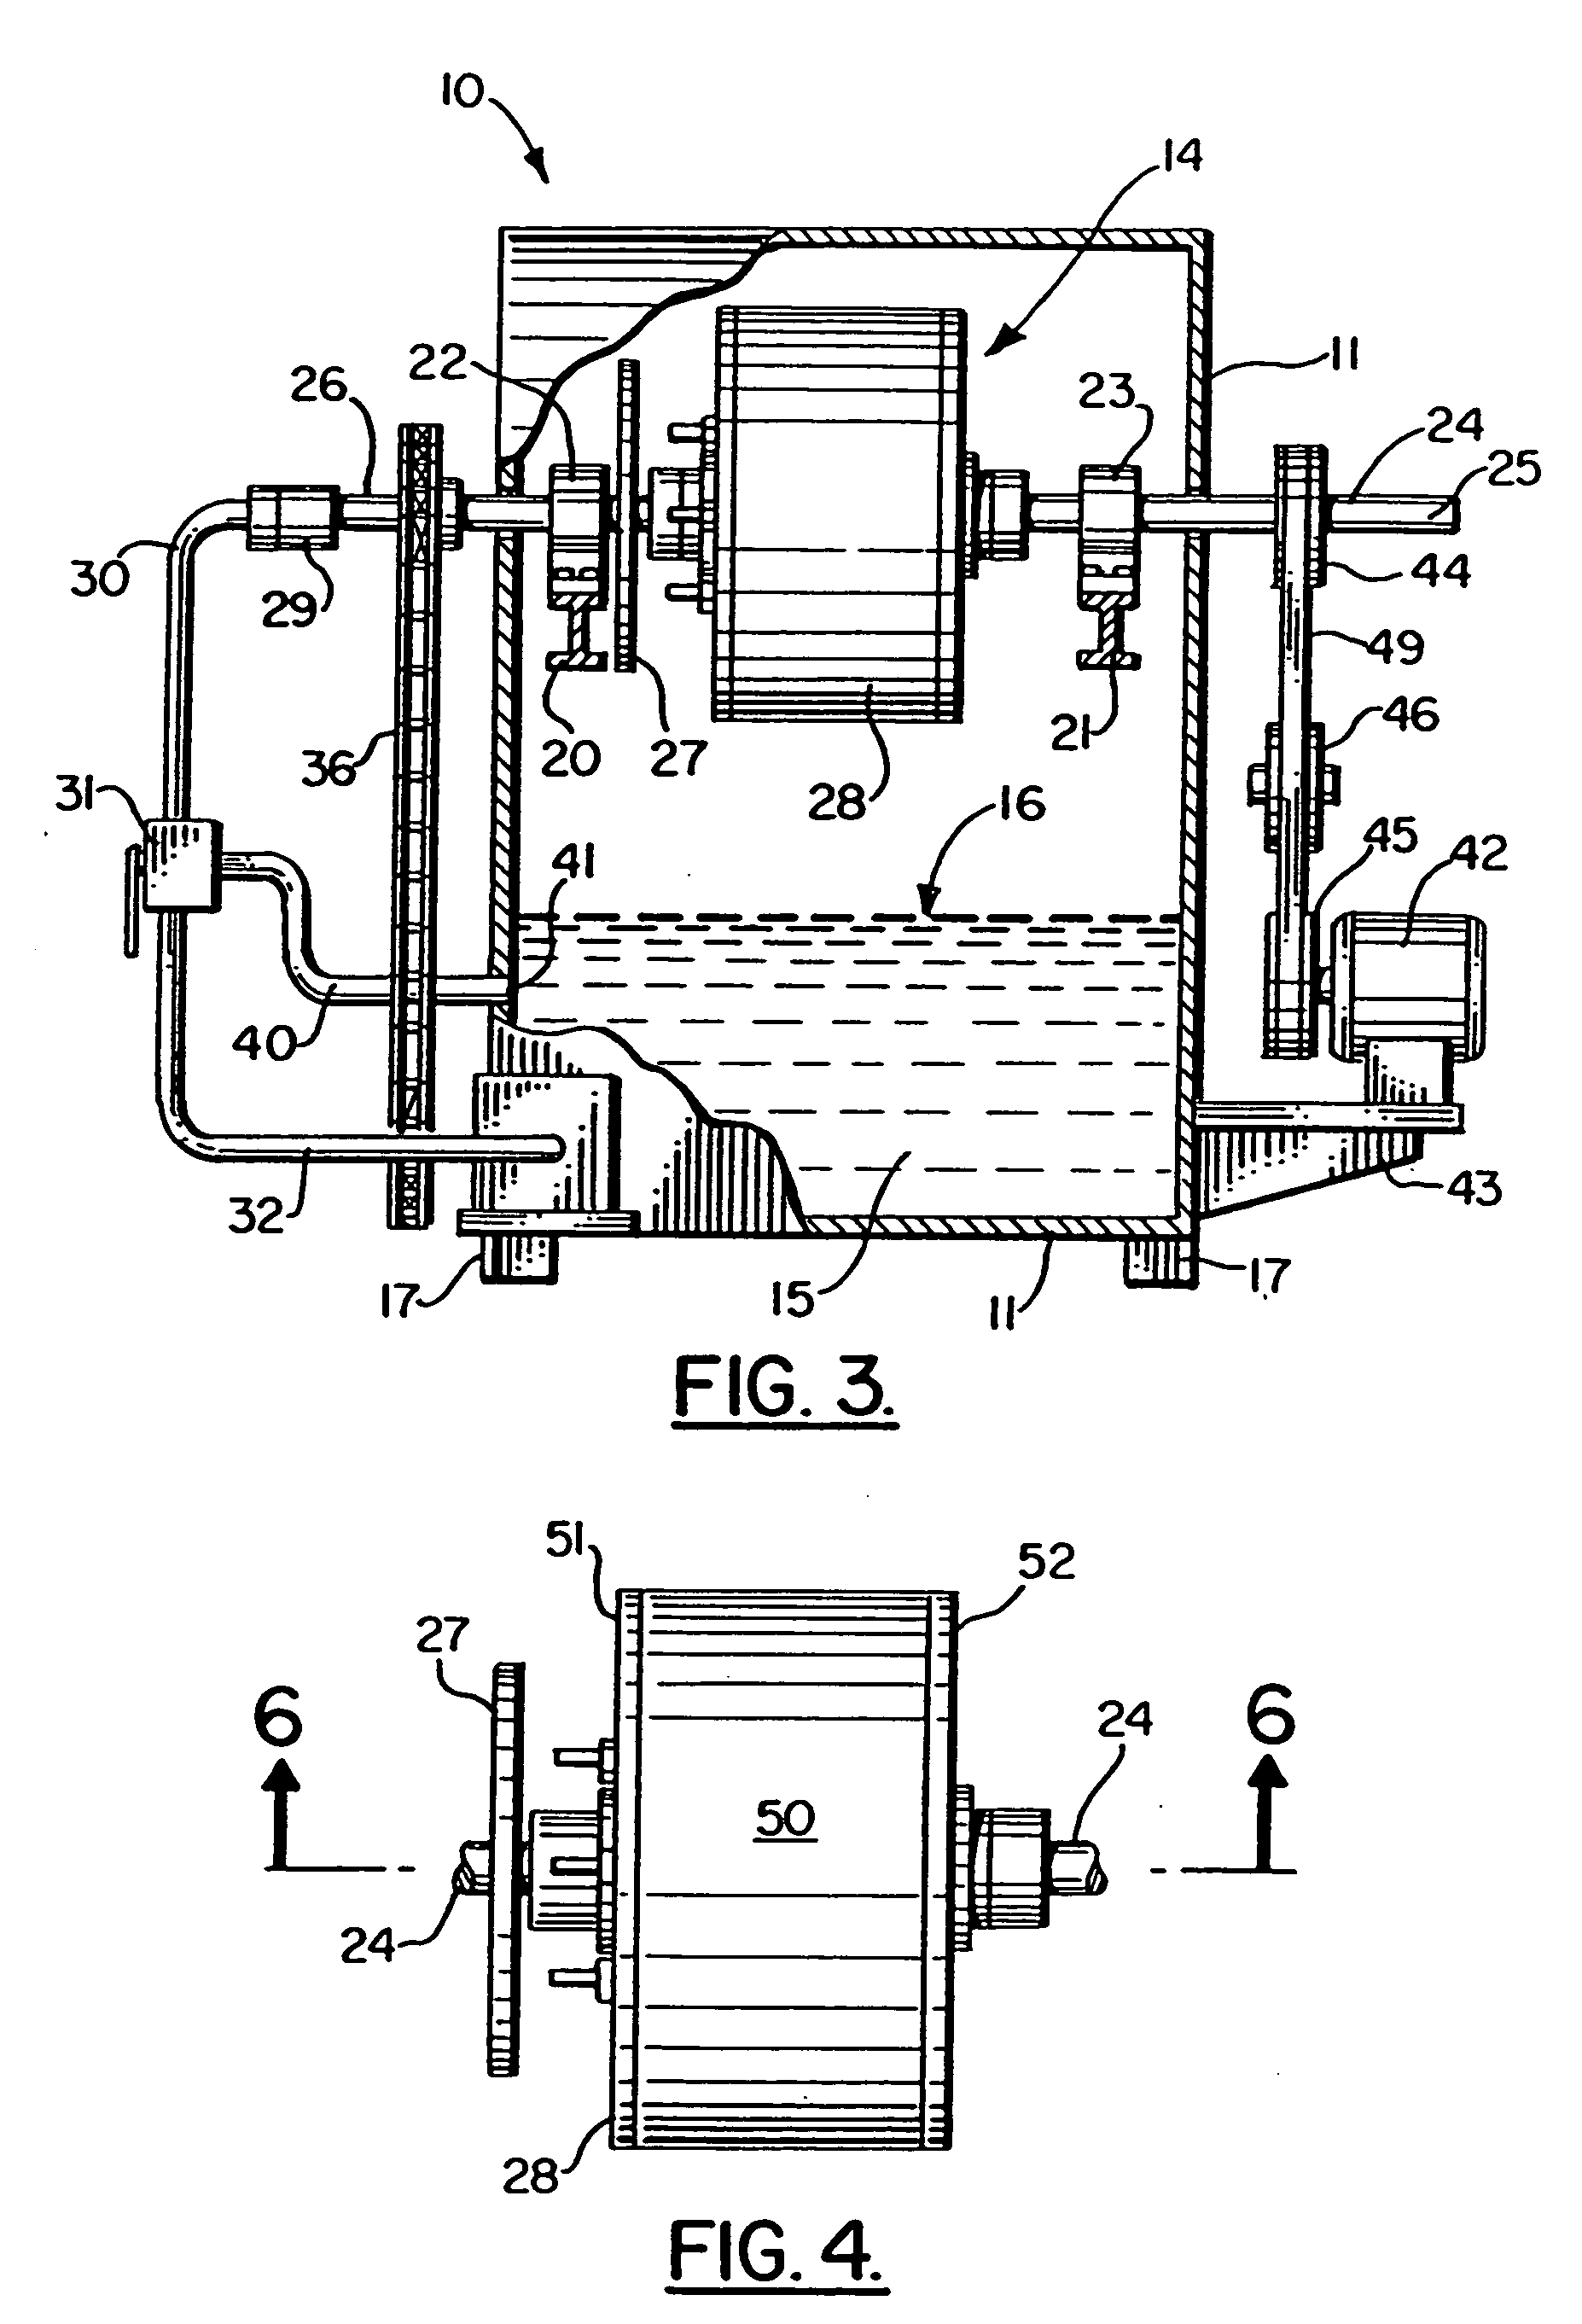 Micro-combustion chamber heat engine